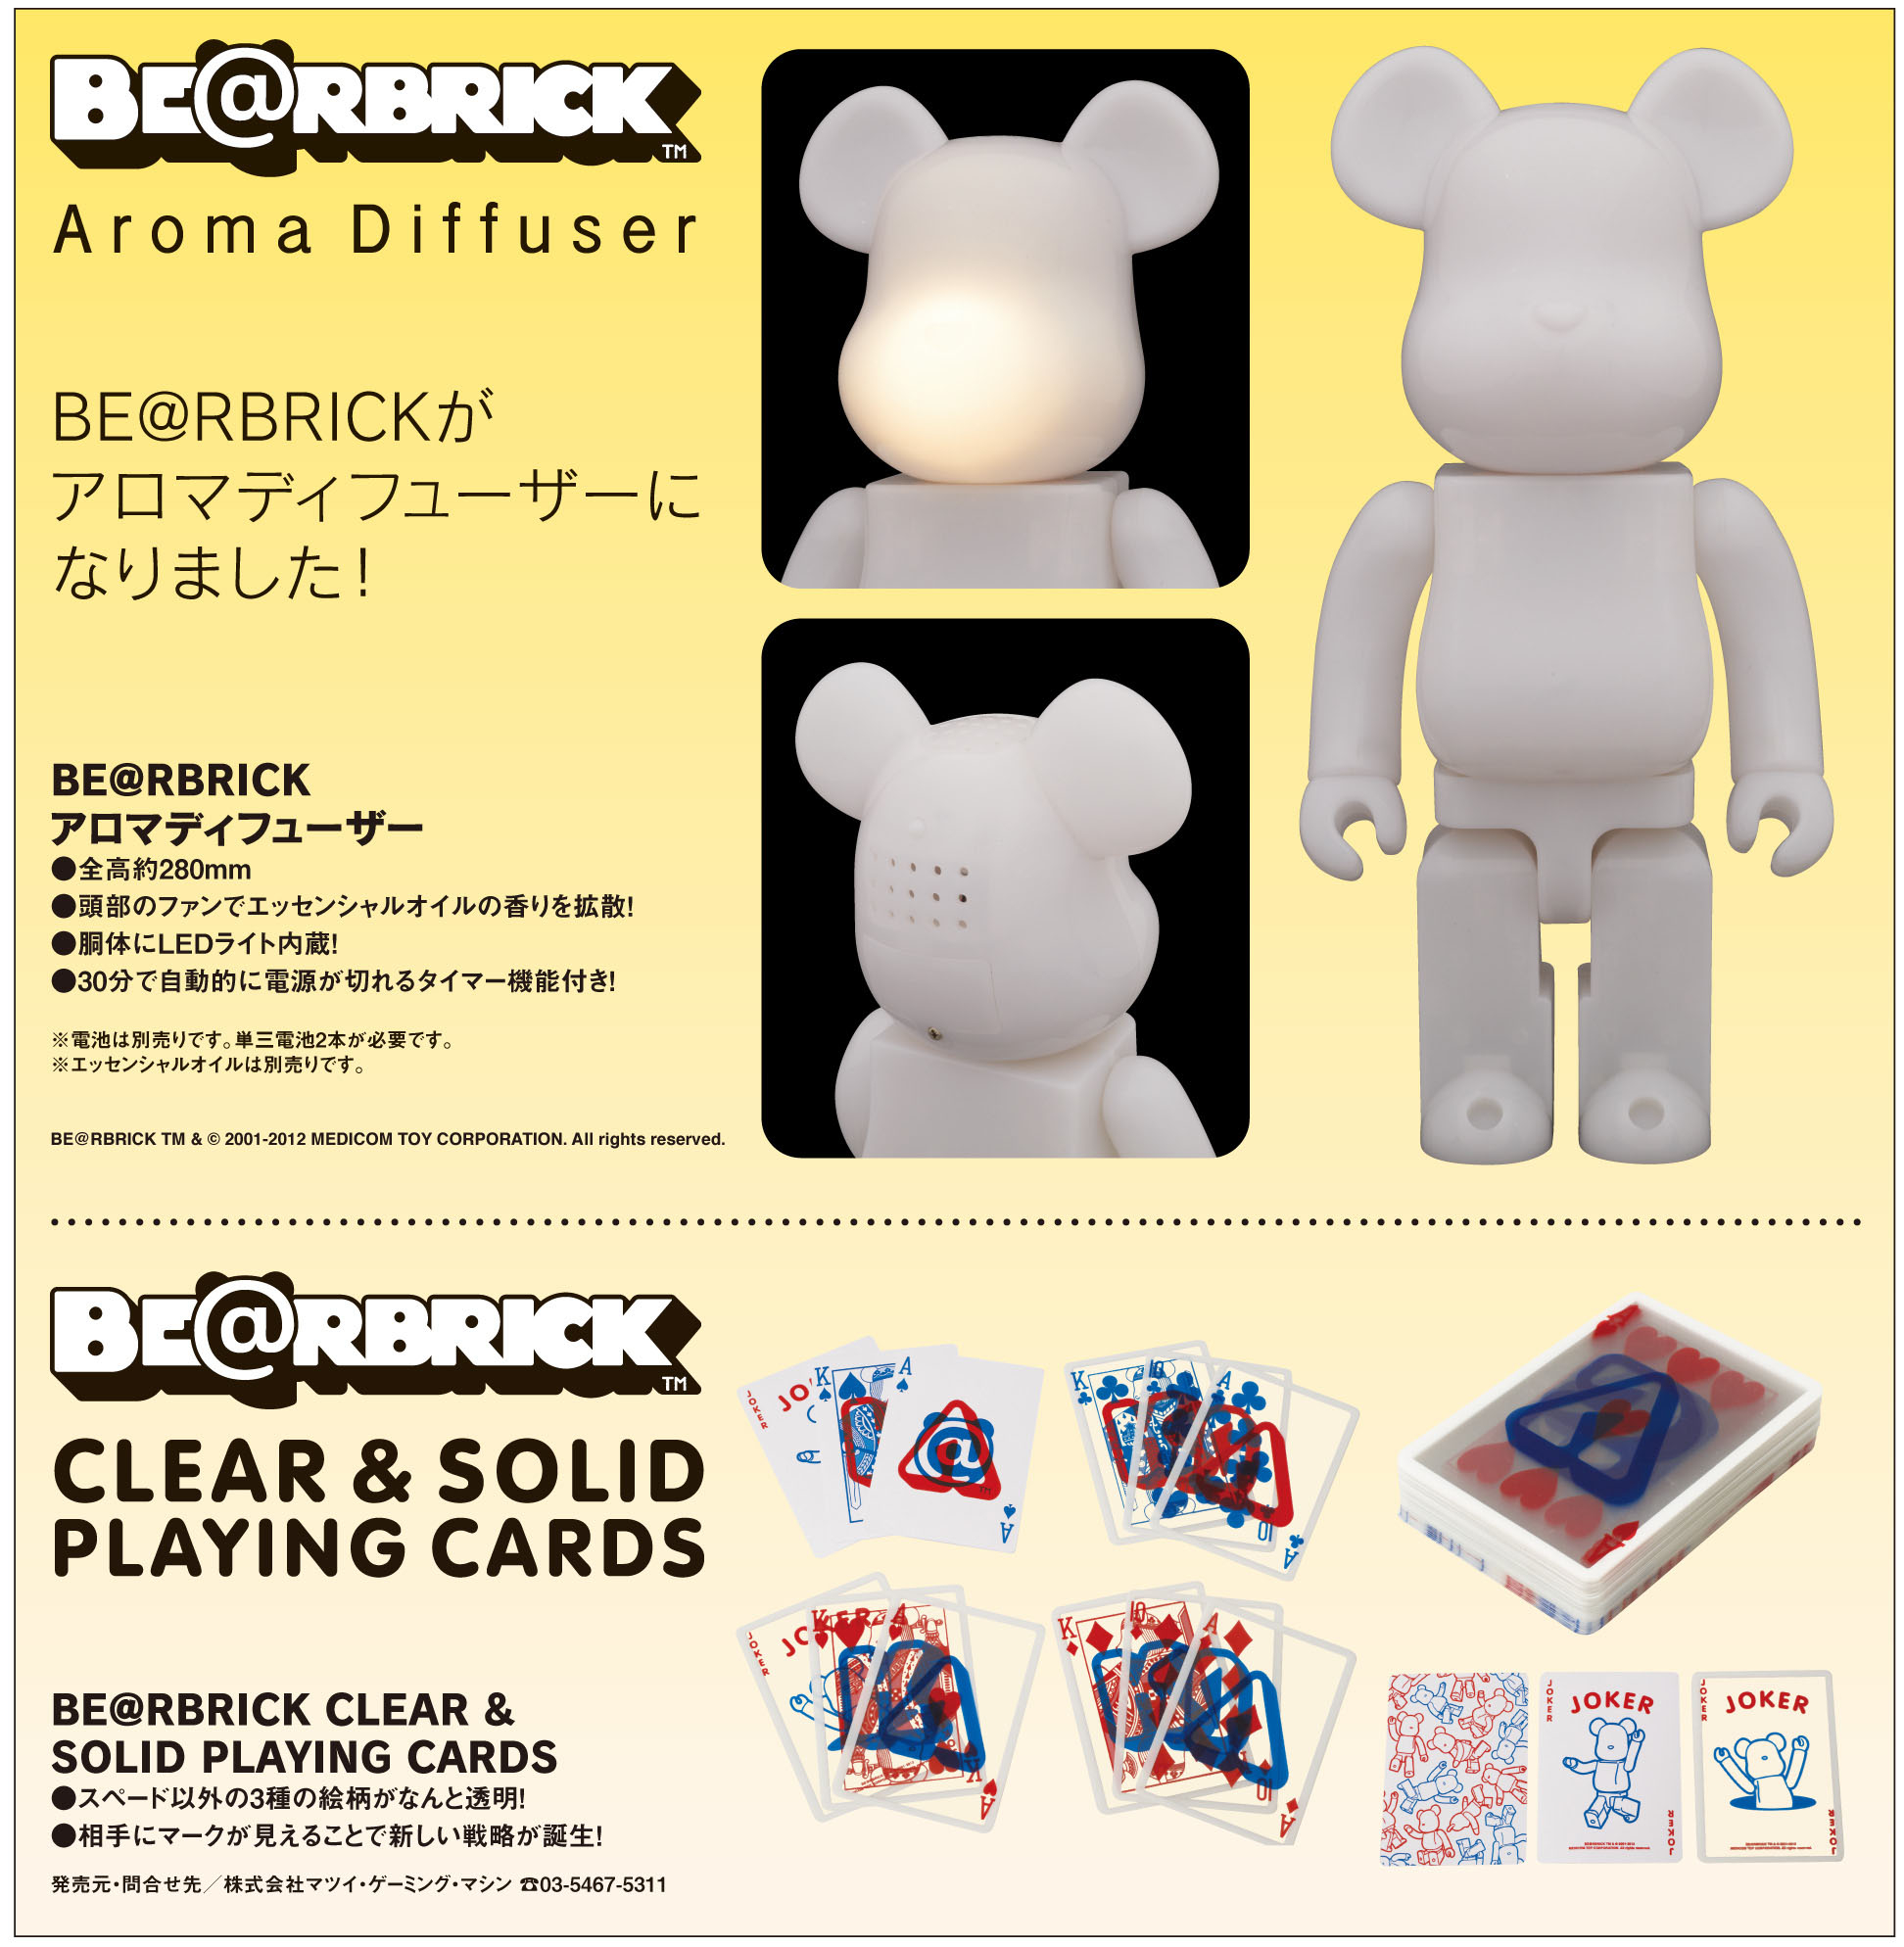 BE@RBRICK アロマディフューザー & CLEAR & SOLID PLAYING CARDS